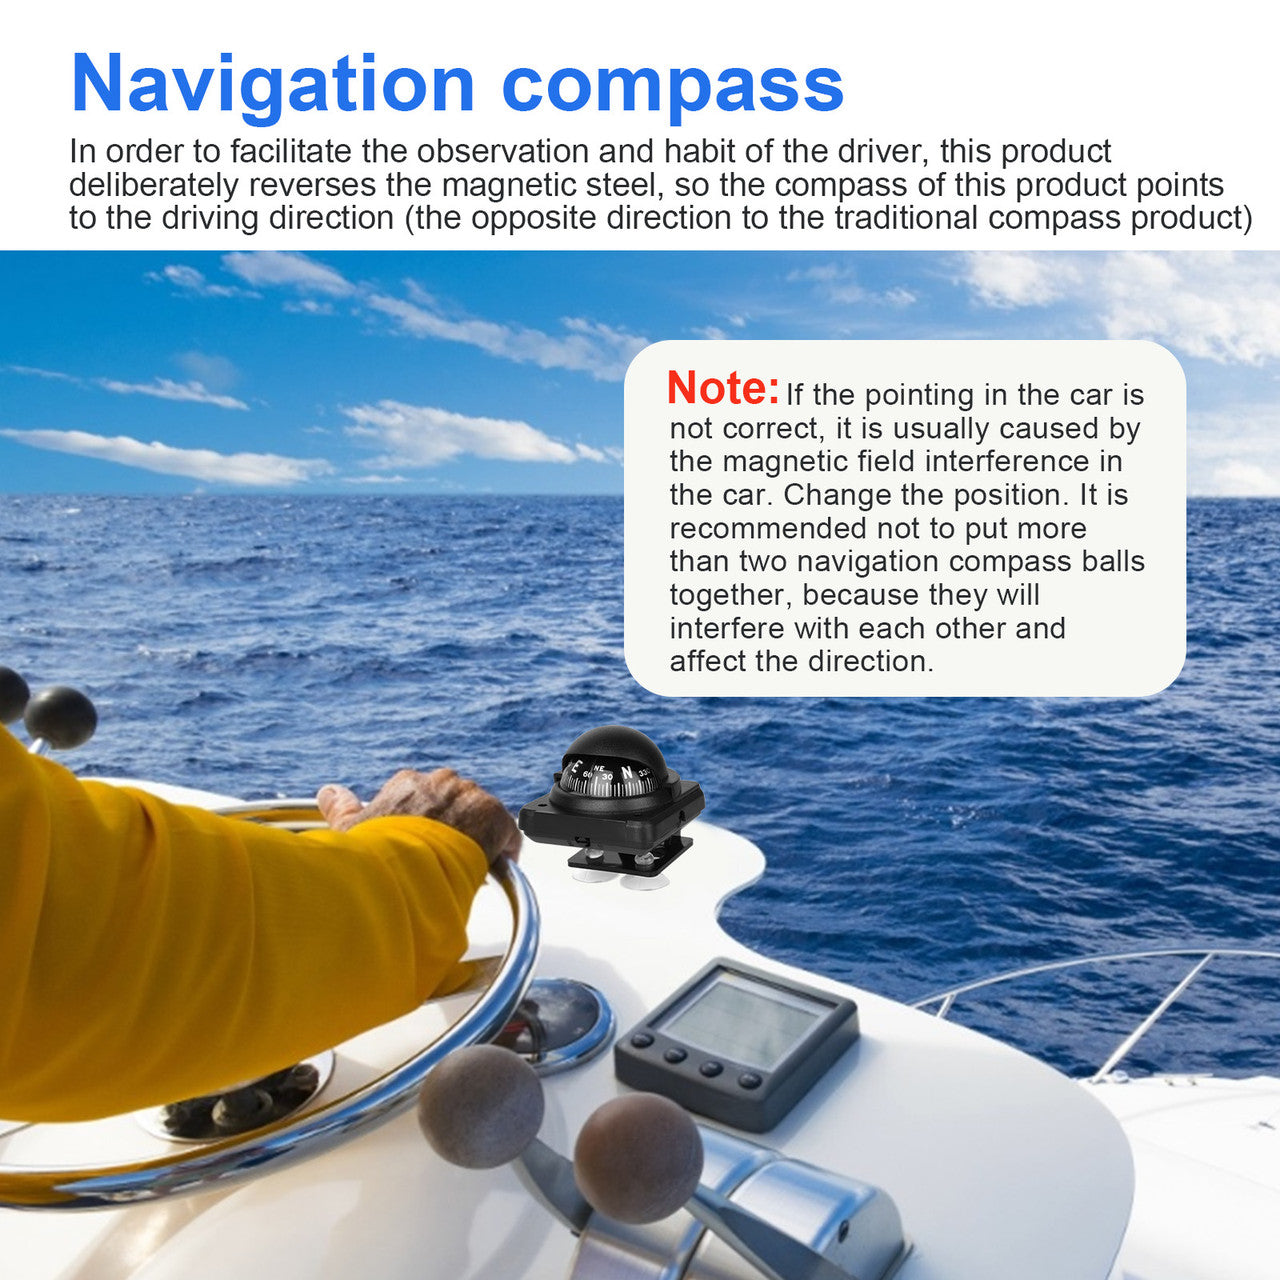 Car Ship Compass with Strong Stability and Multi-Viewing Angle